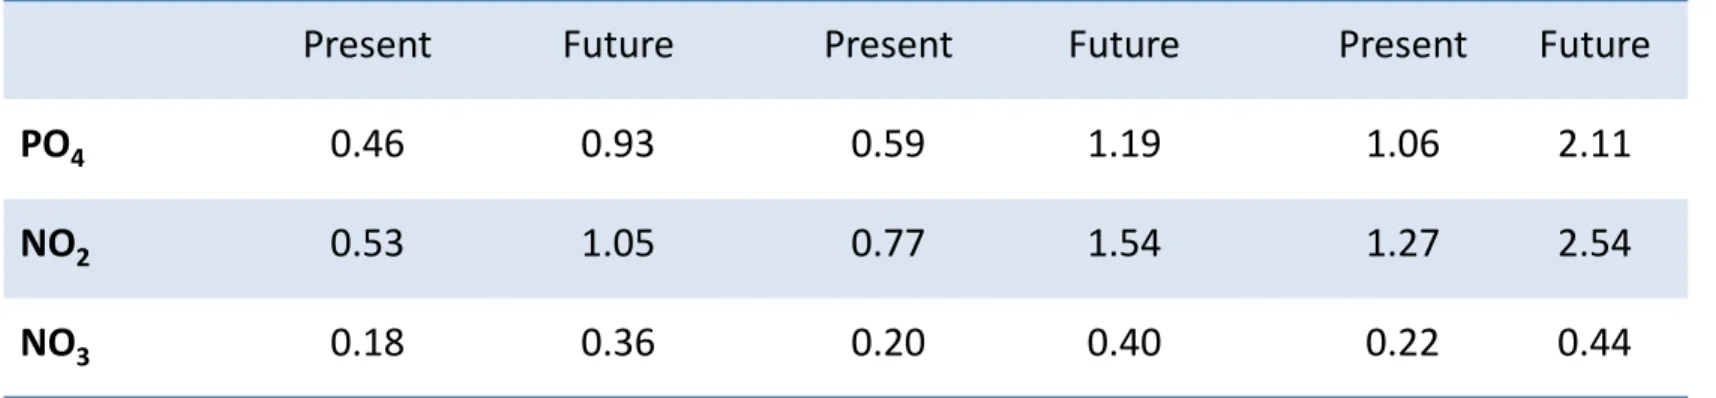 Table 1 Nutrient concentrations in the present (mean of the last 7 years 